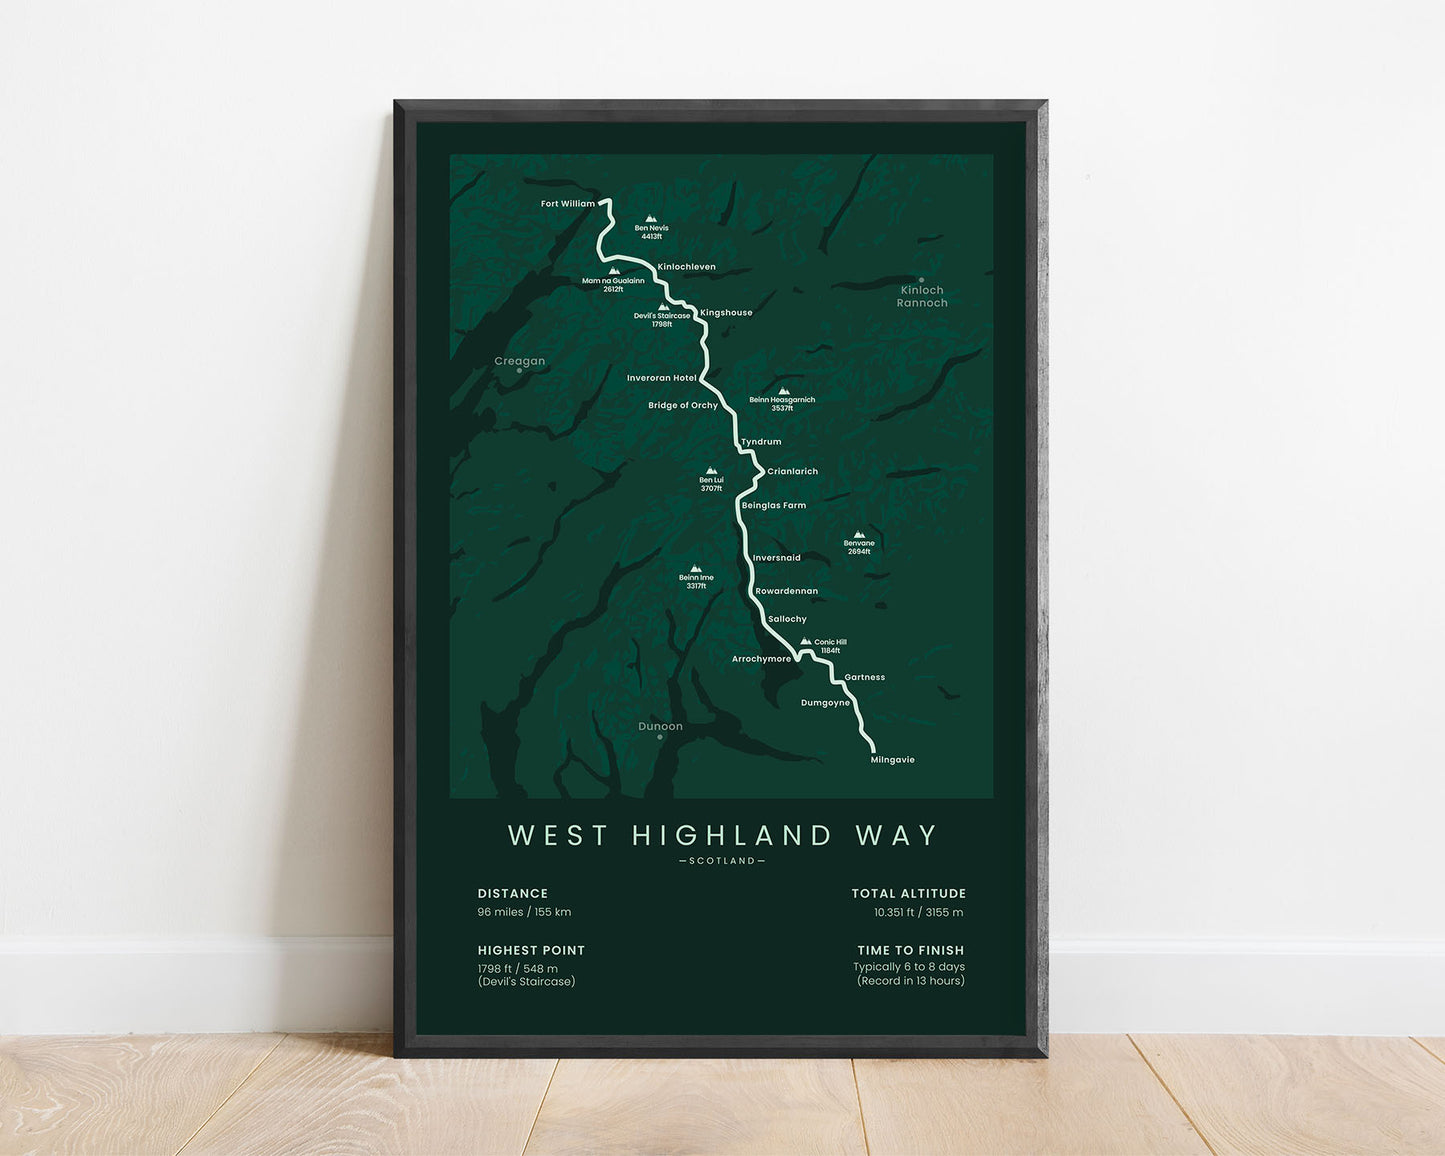 West Highland Way Minimalist Backpacking Route Map Poster with green background